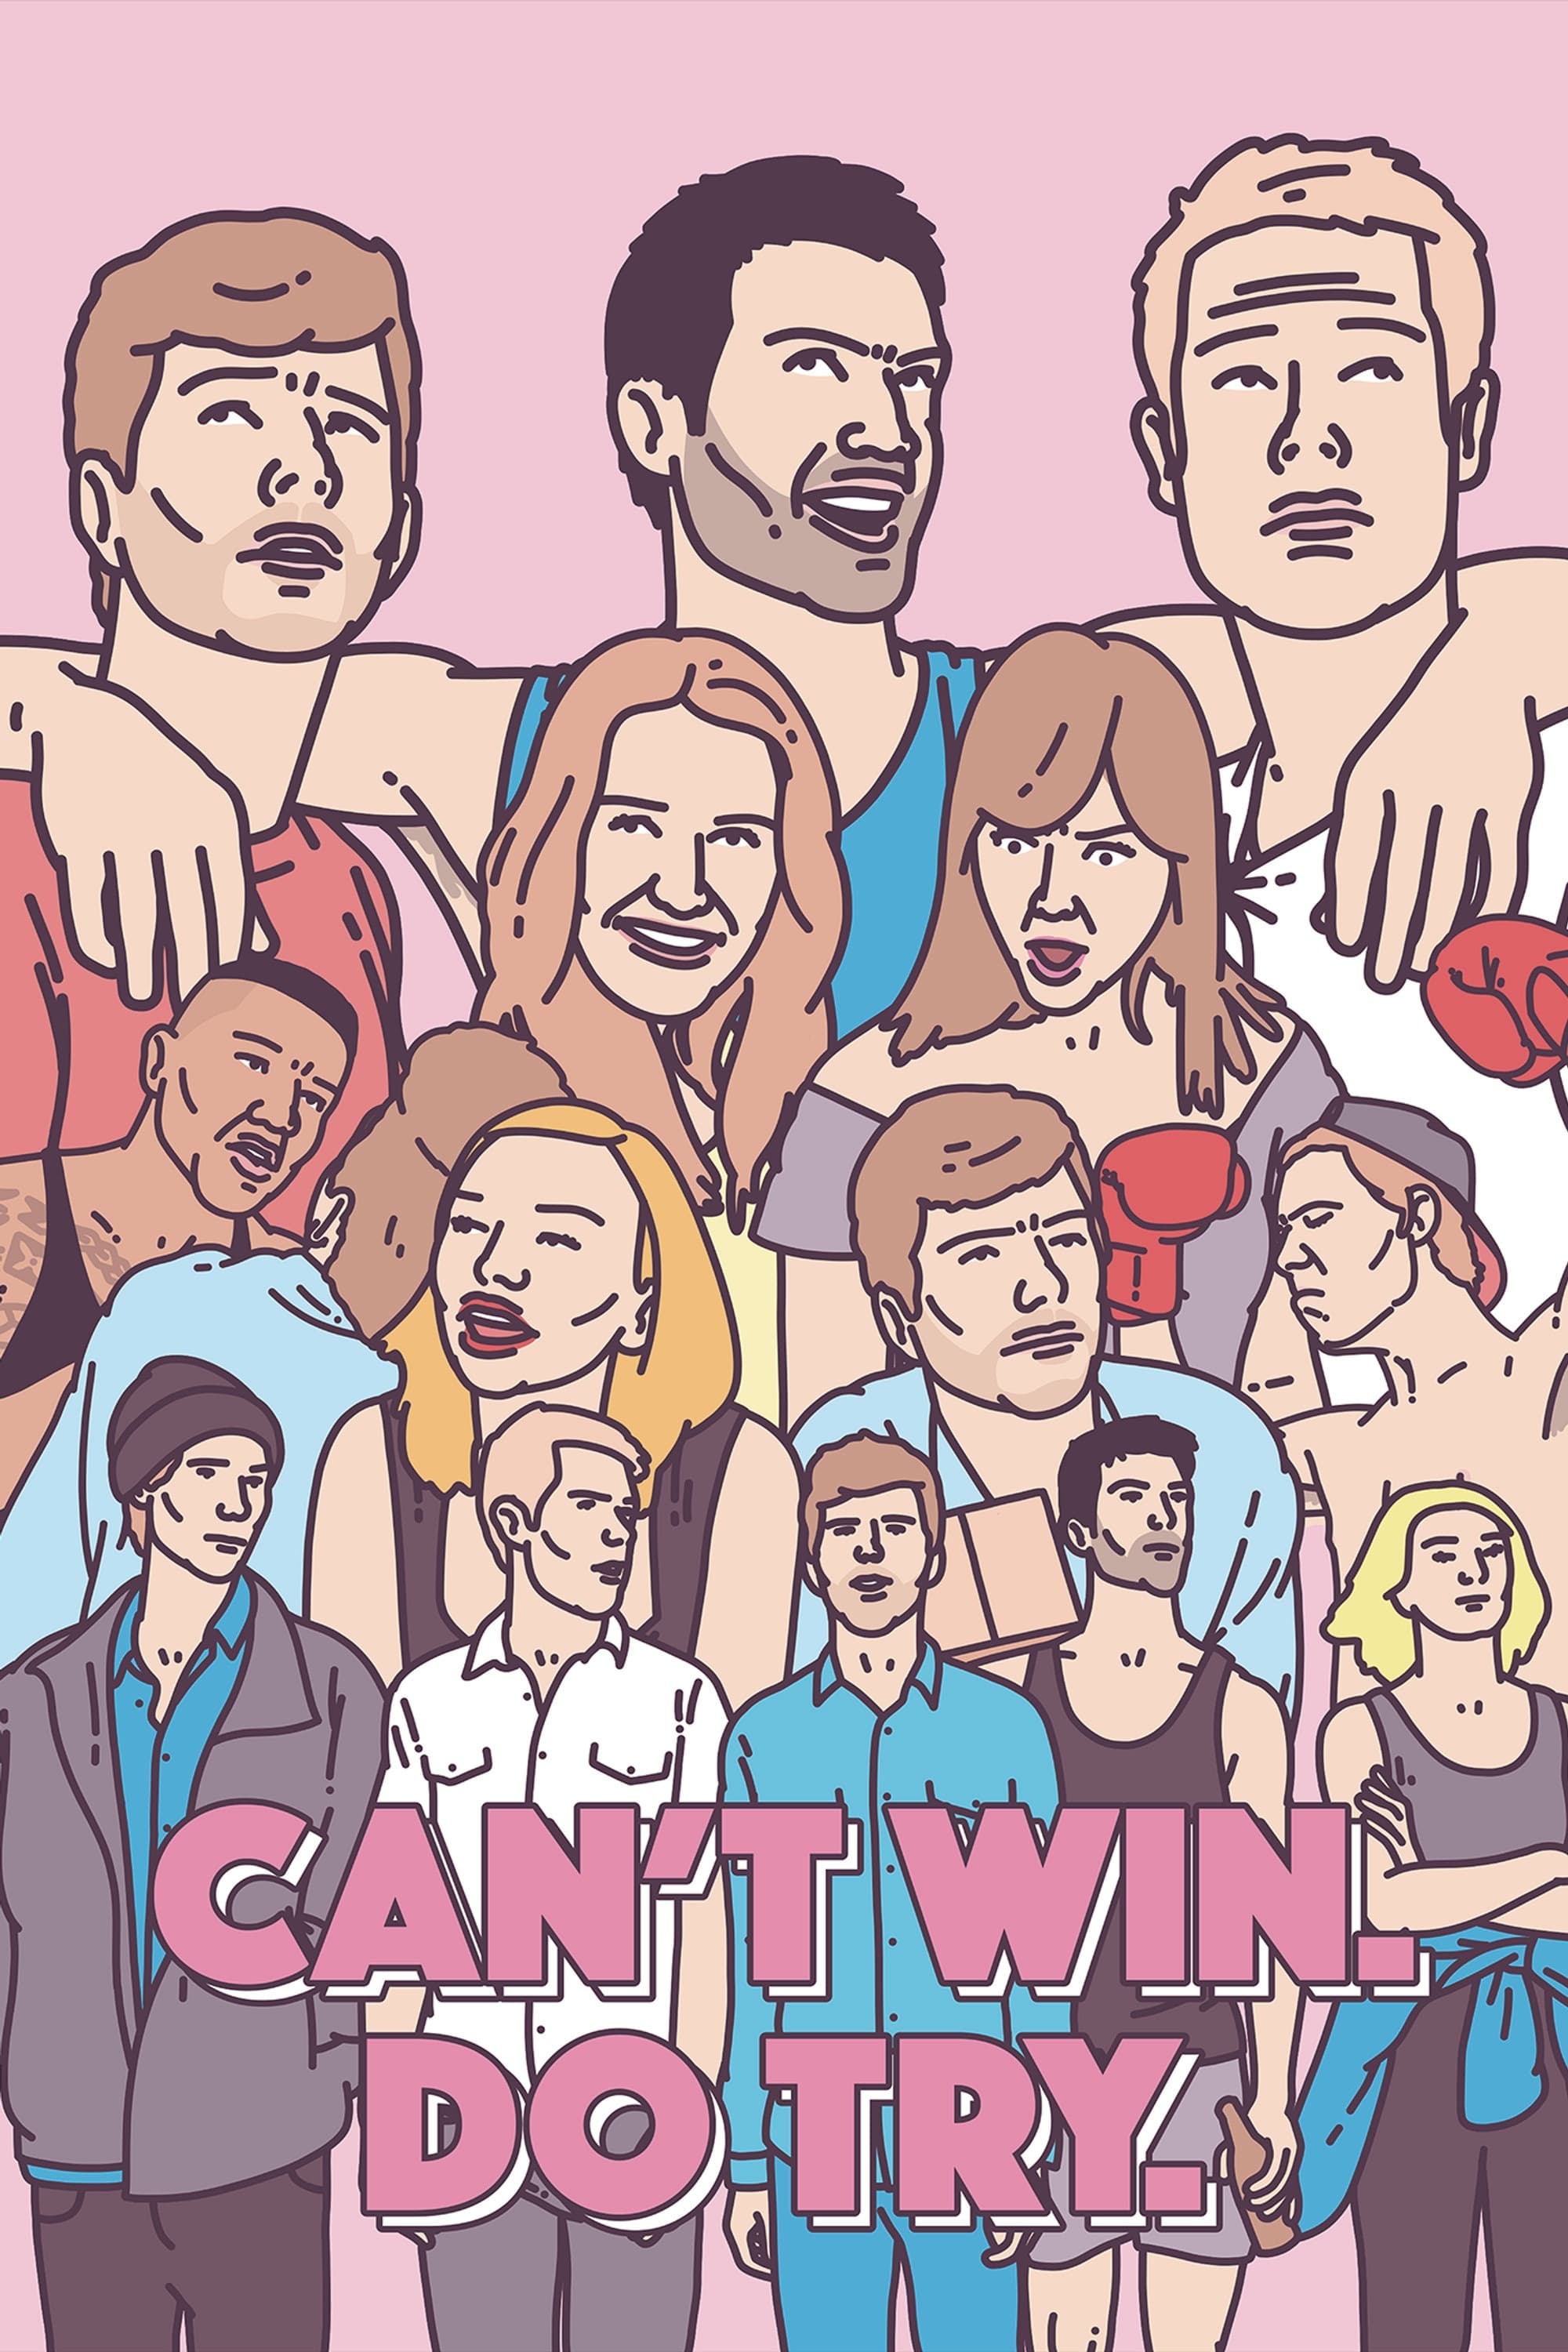 Can't Win. Do Try (2016)